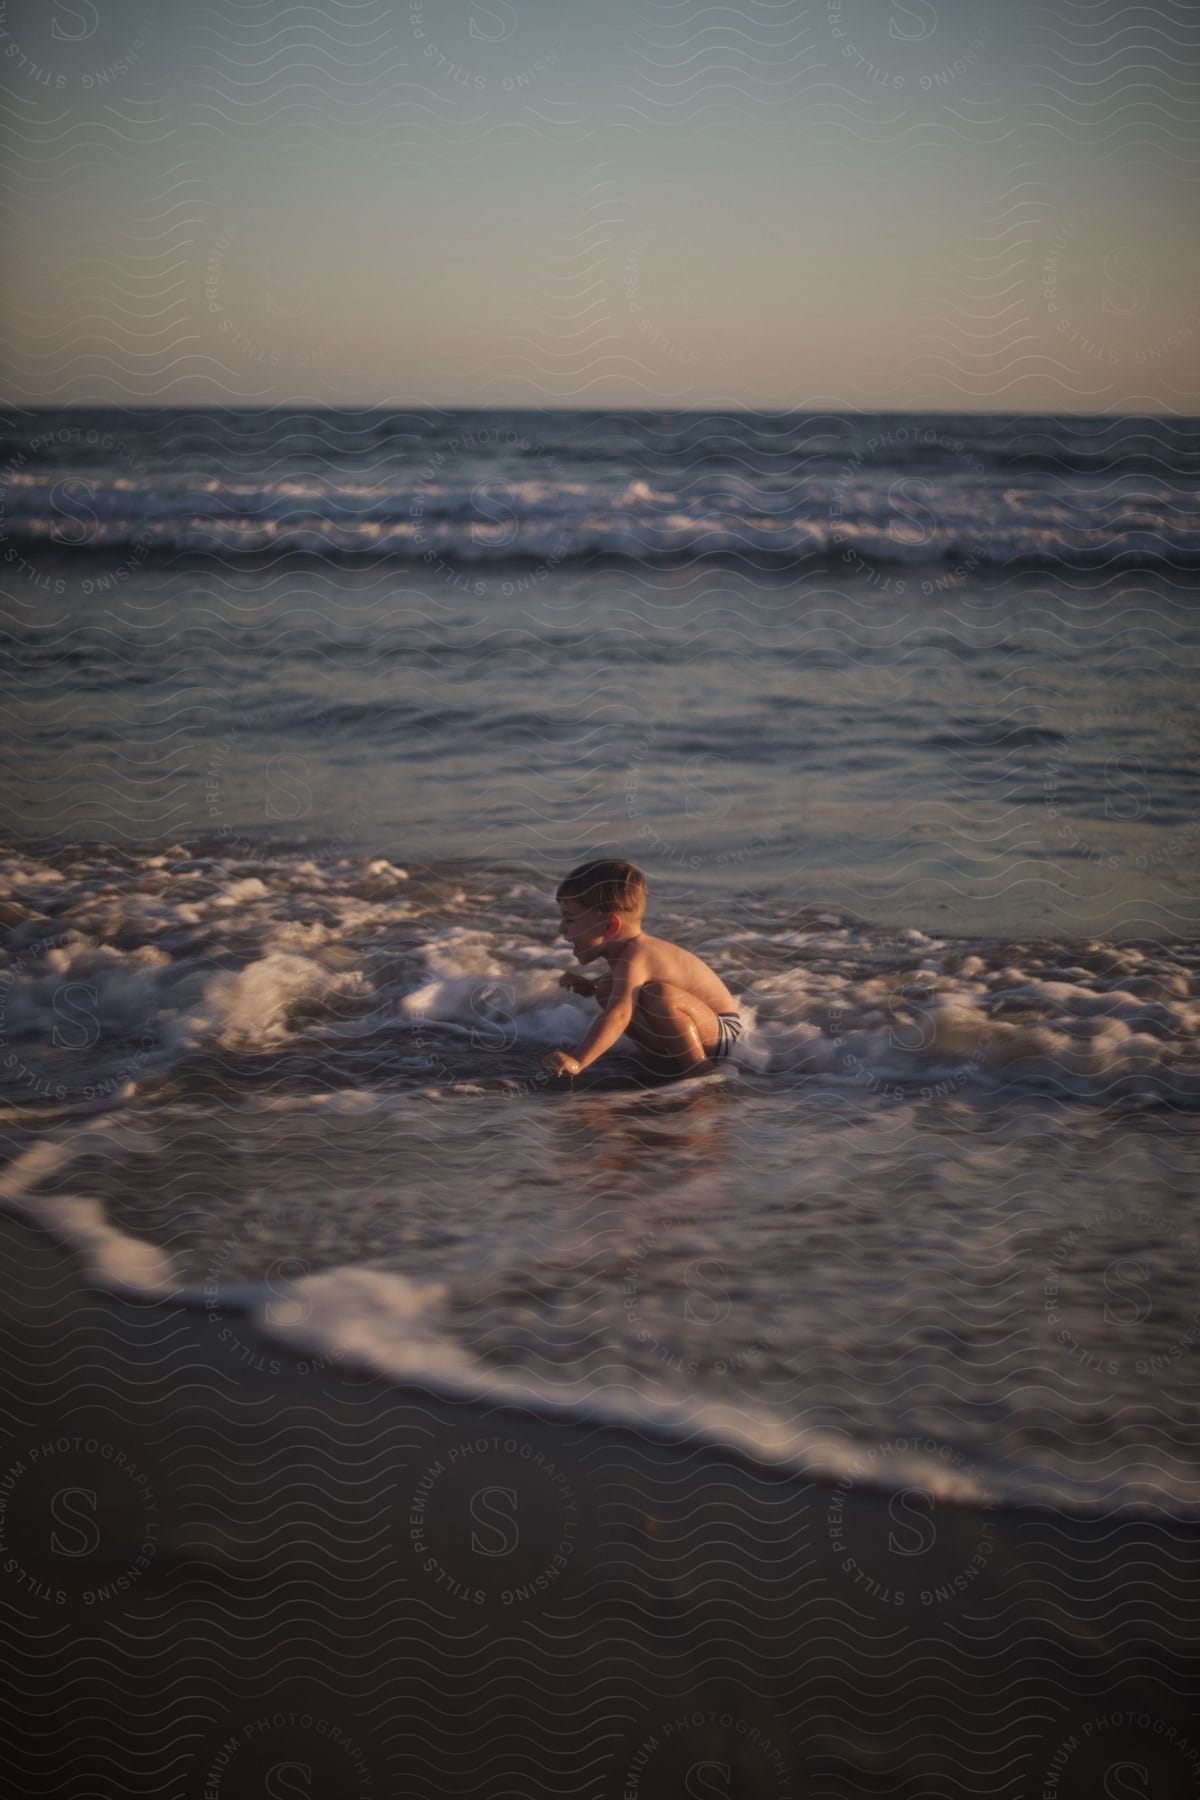 Young boy squats in the shallow waves lapping up on the beach.